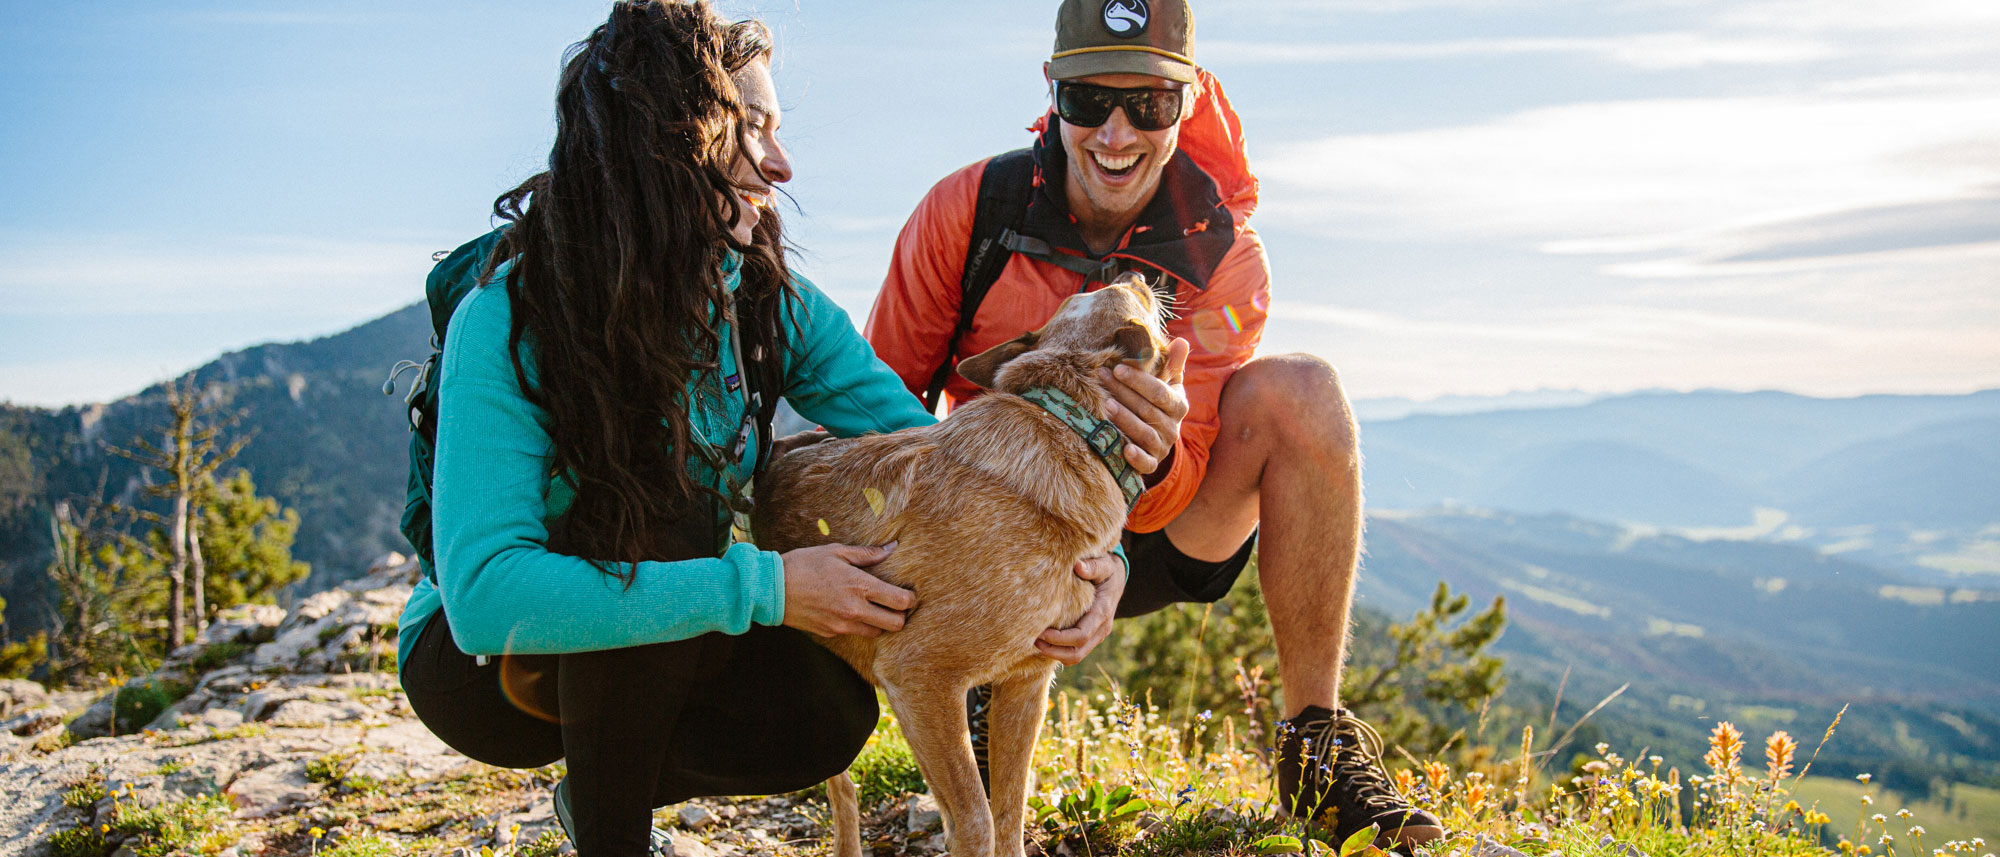 Two hikers petting a dog in the mountains on a hike.